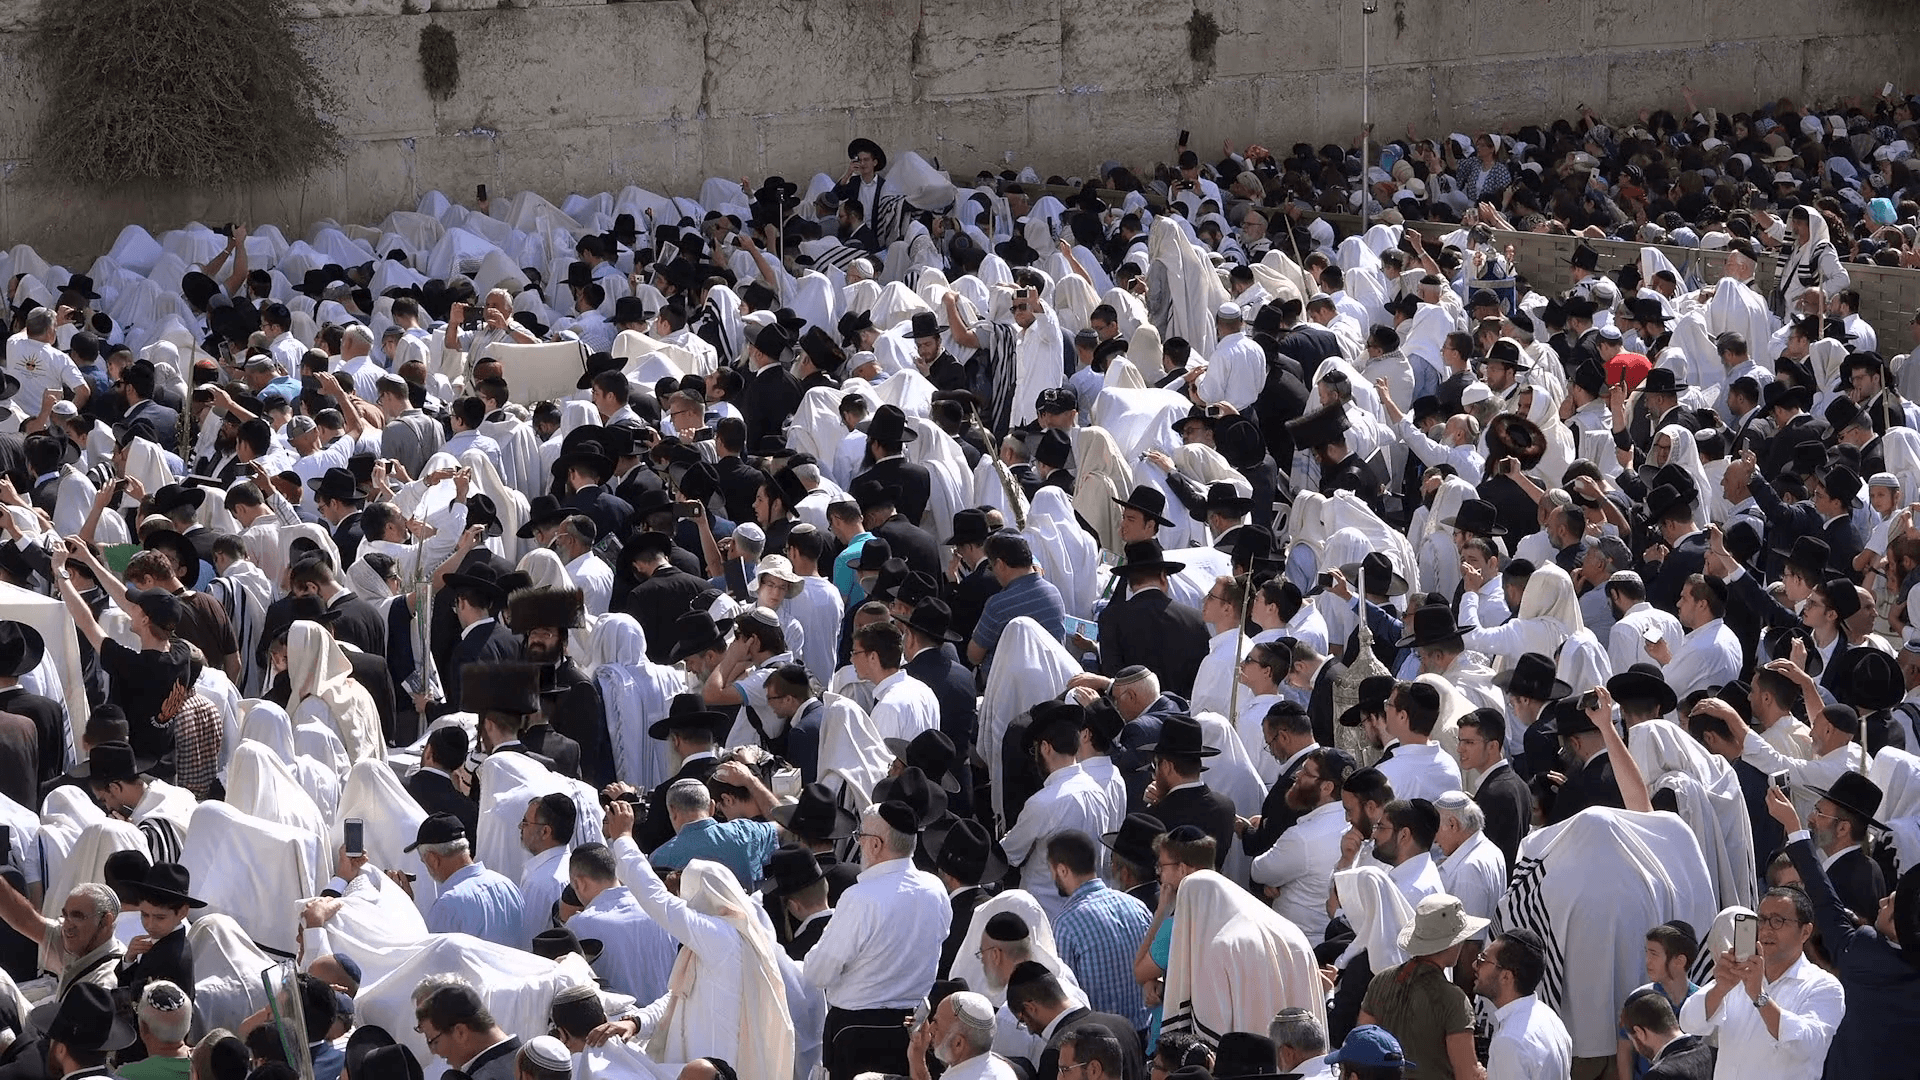 Israel religion and culture, traditionally dressed Jewish worshipers